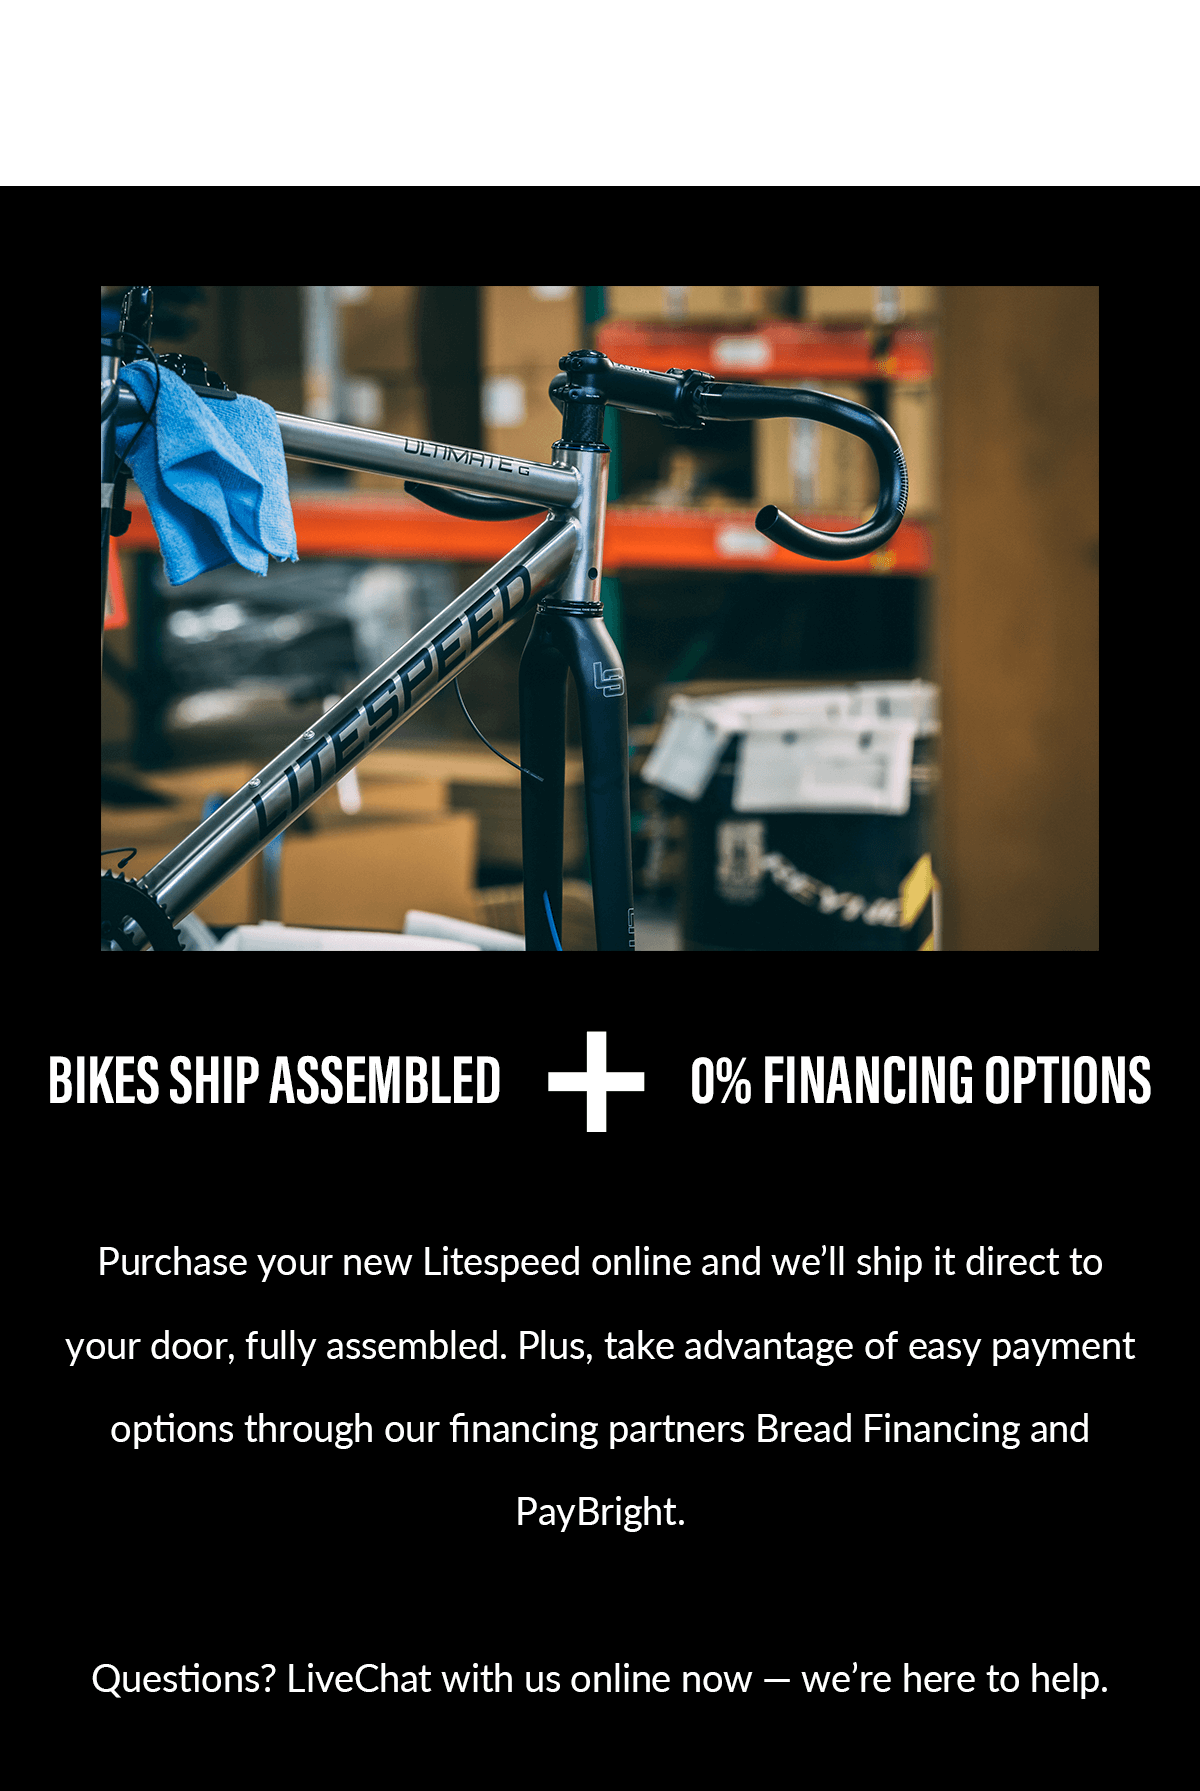 Litespeed bikes ship assembled with 0% financing options available. Shop now!